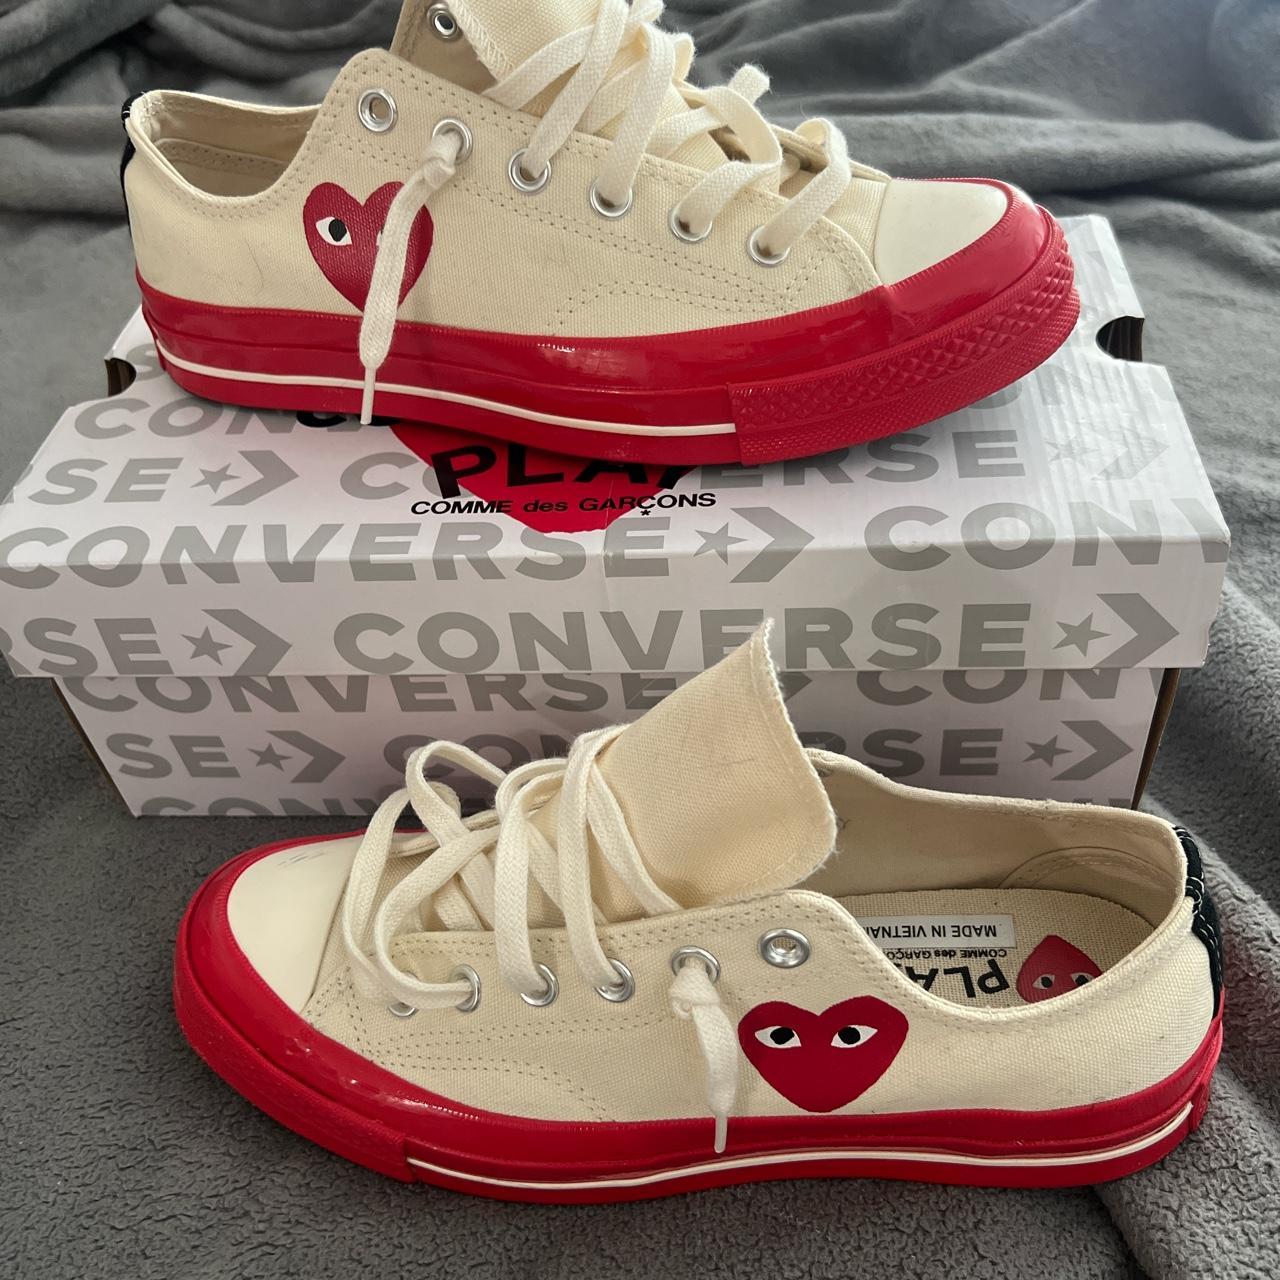 Comme des Garçons Play Men's White and Red Trainers